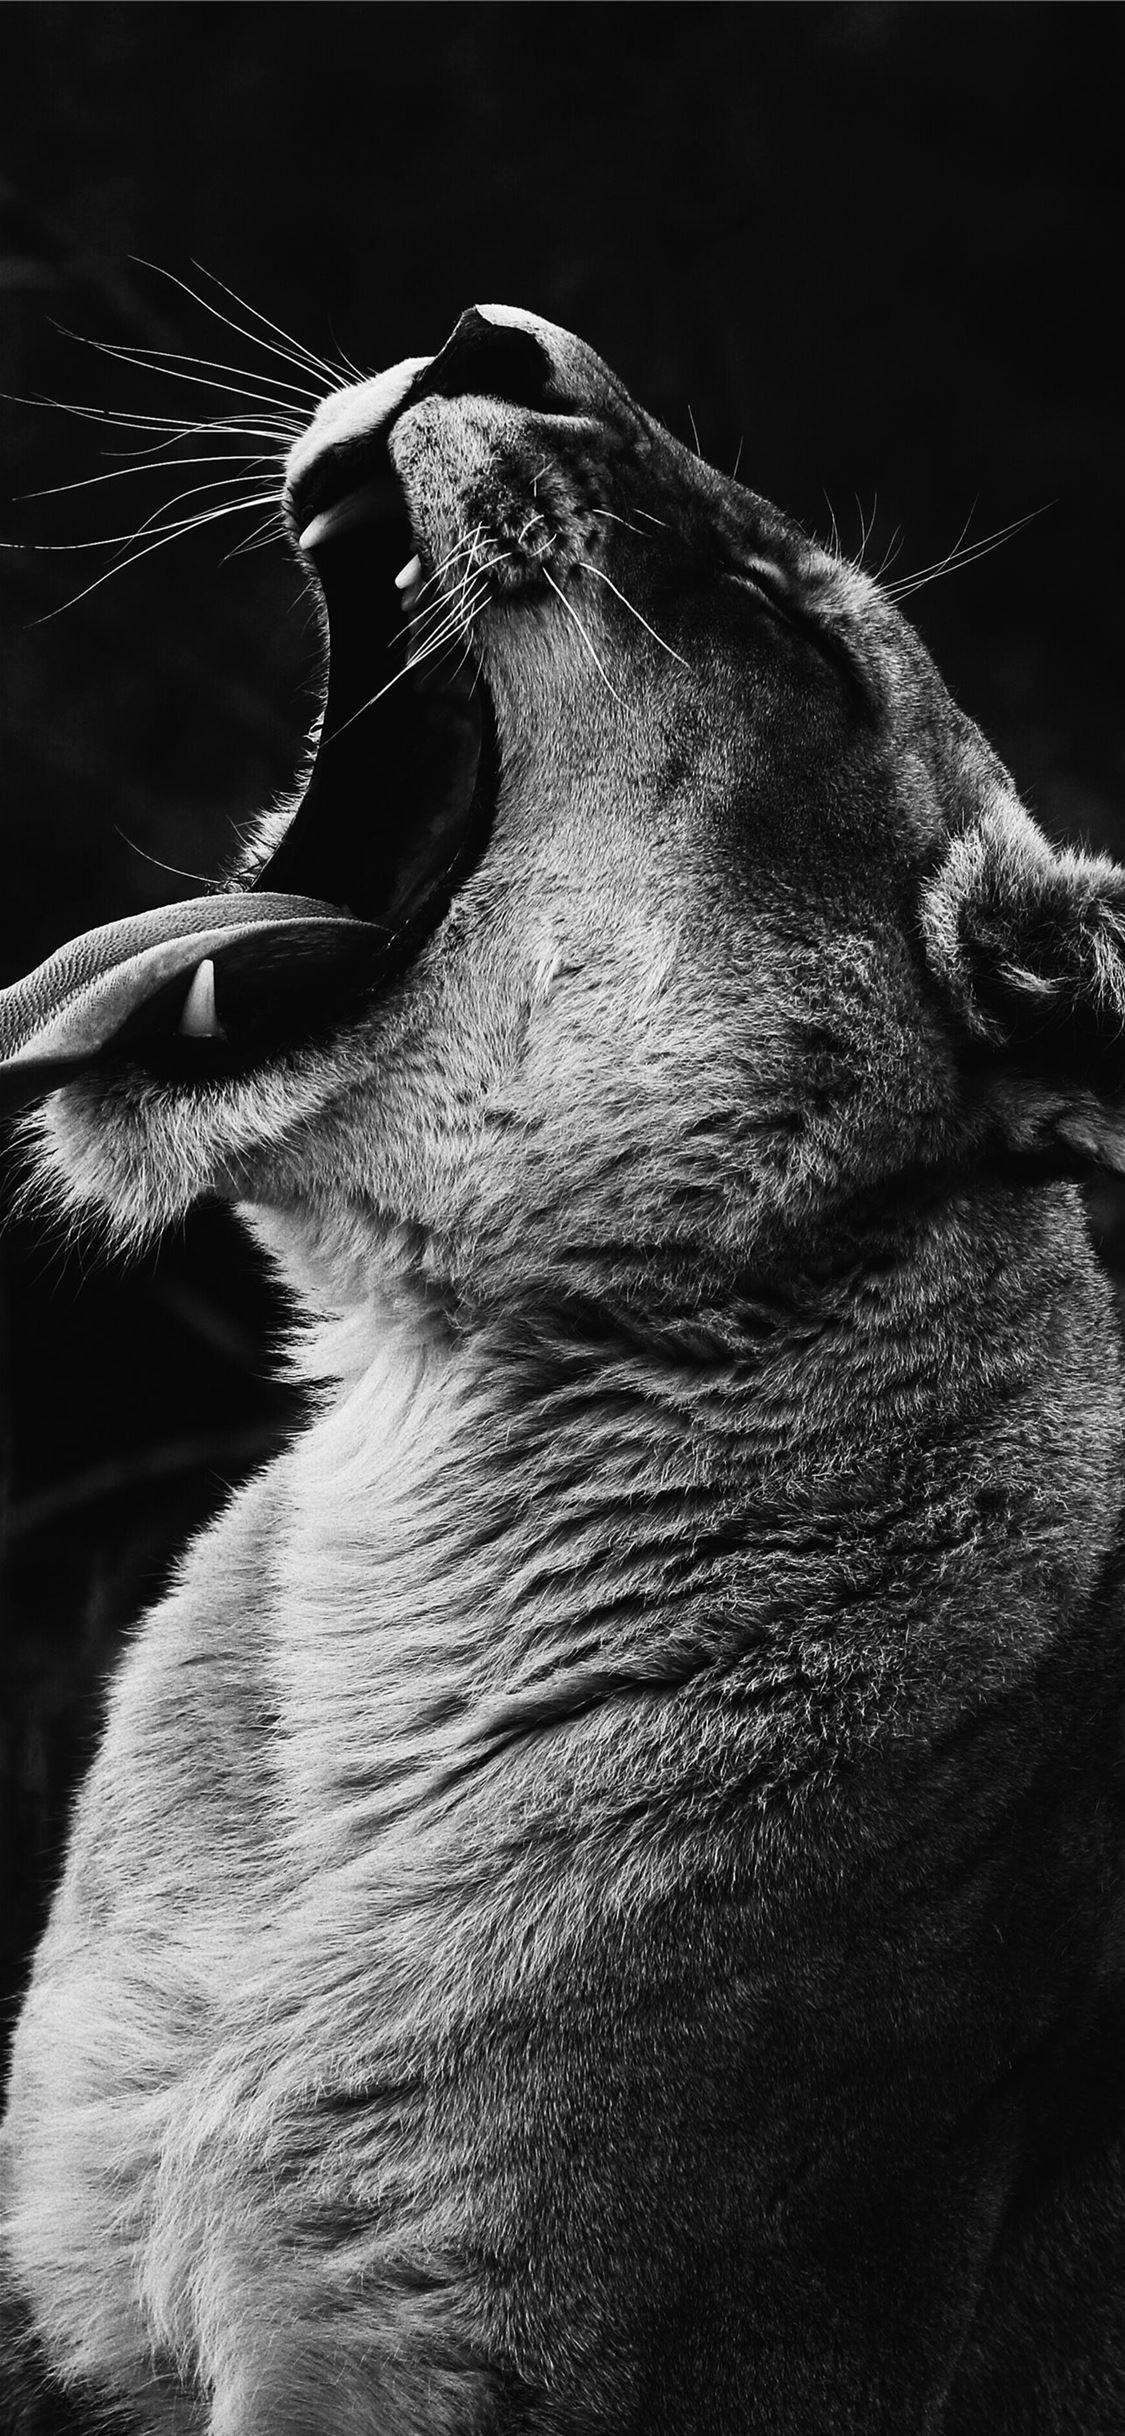 grayscale photography of yawning lioness iPhone X wallpaper 